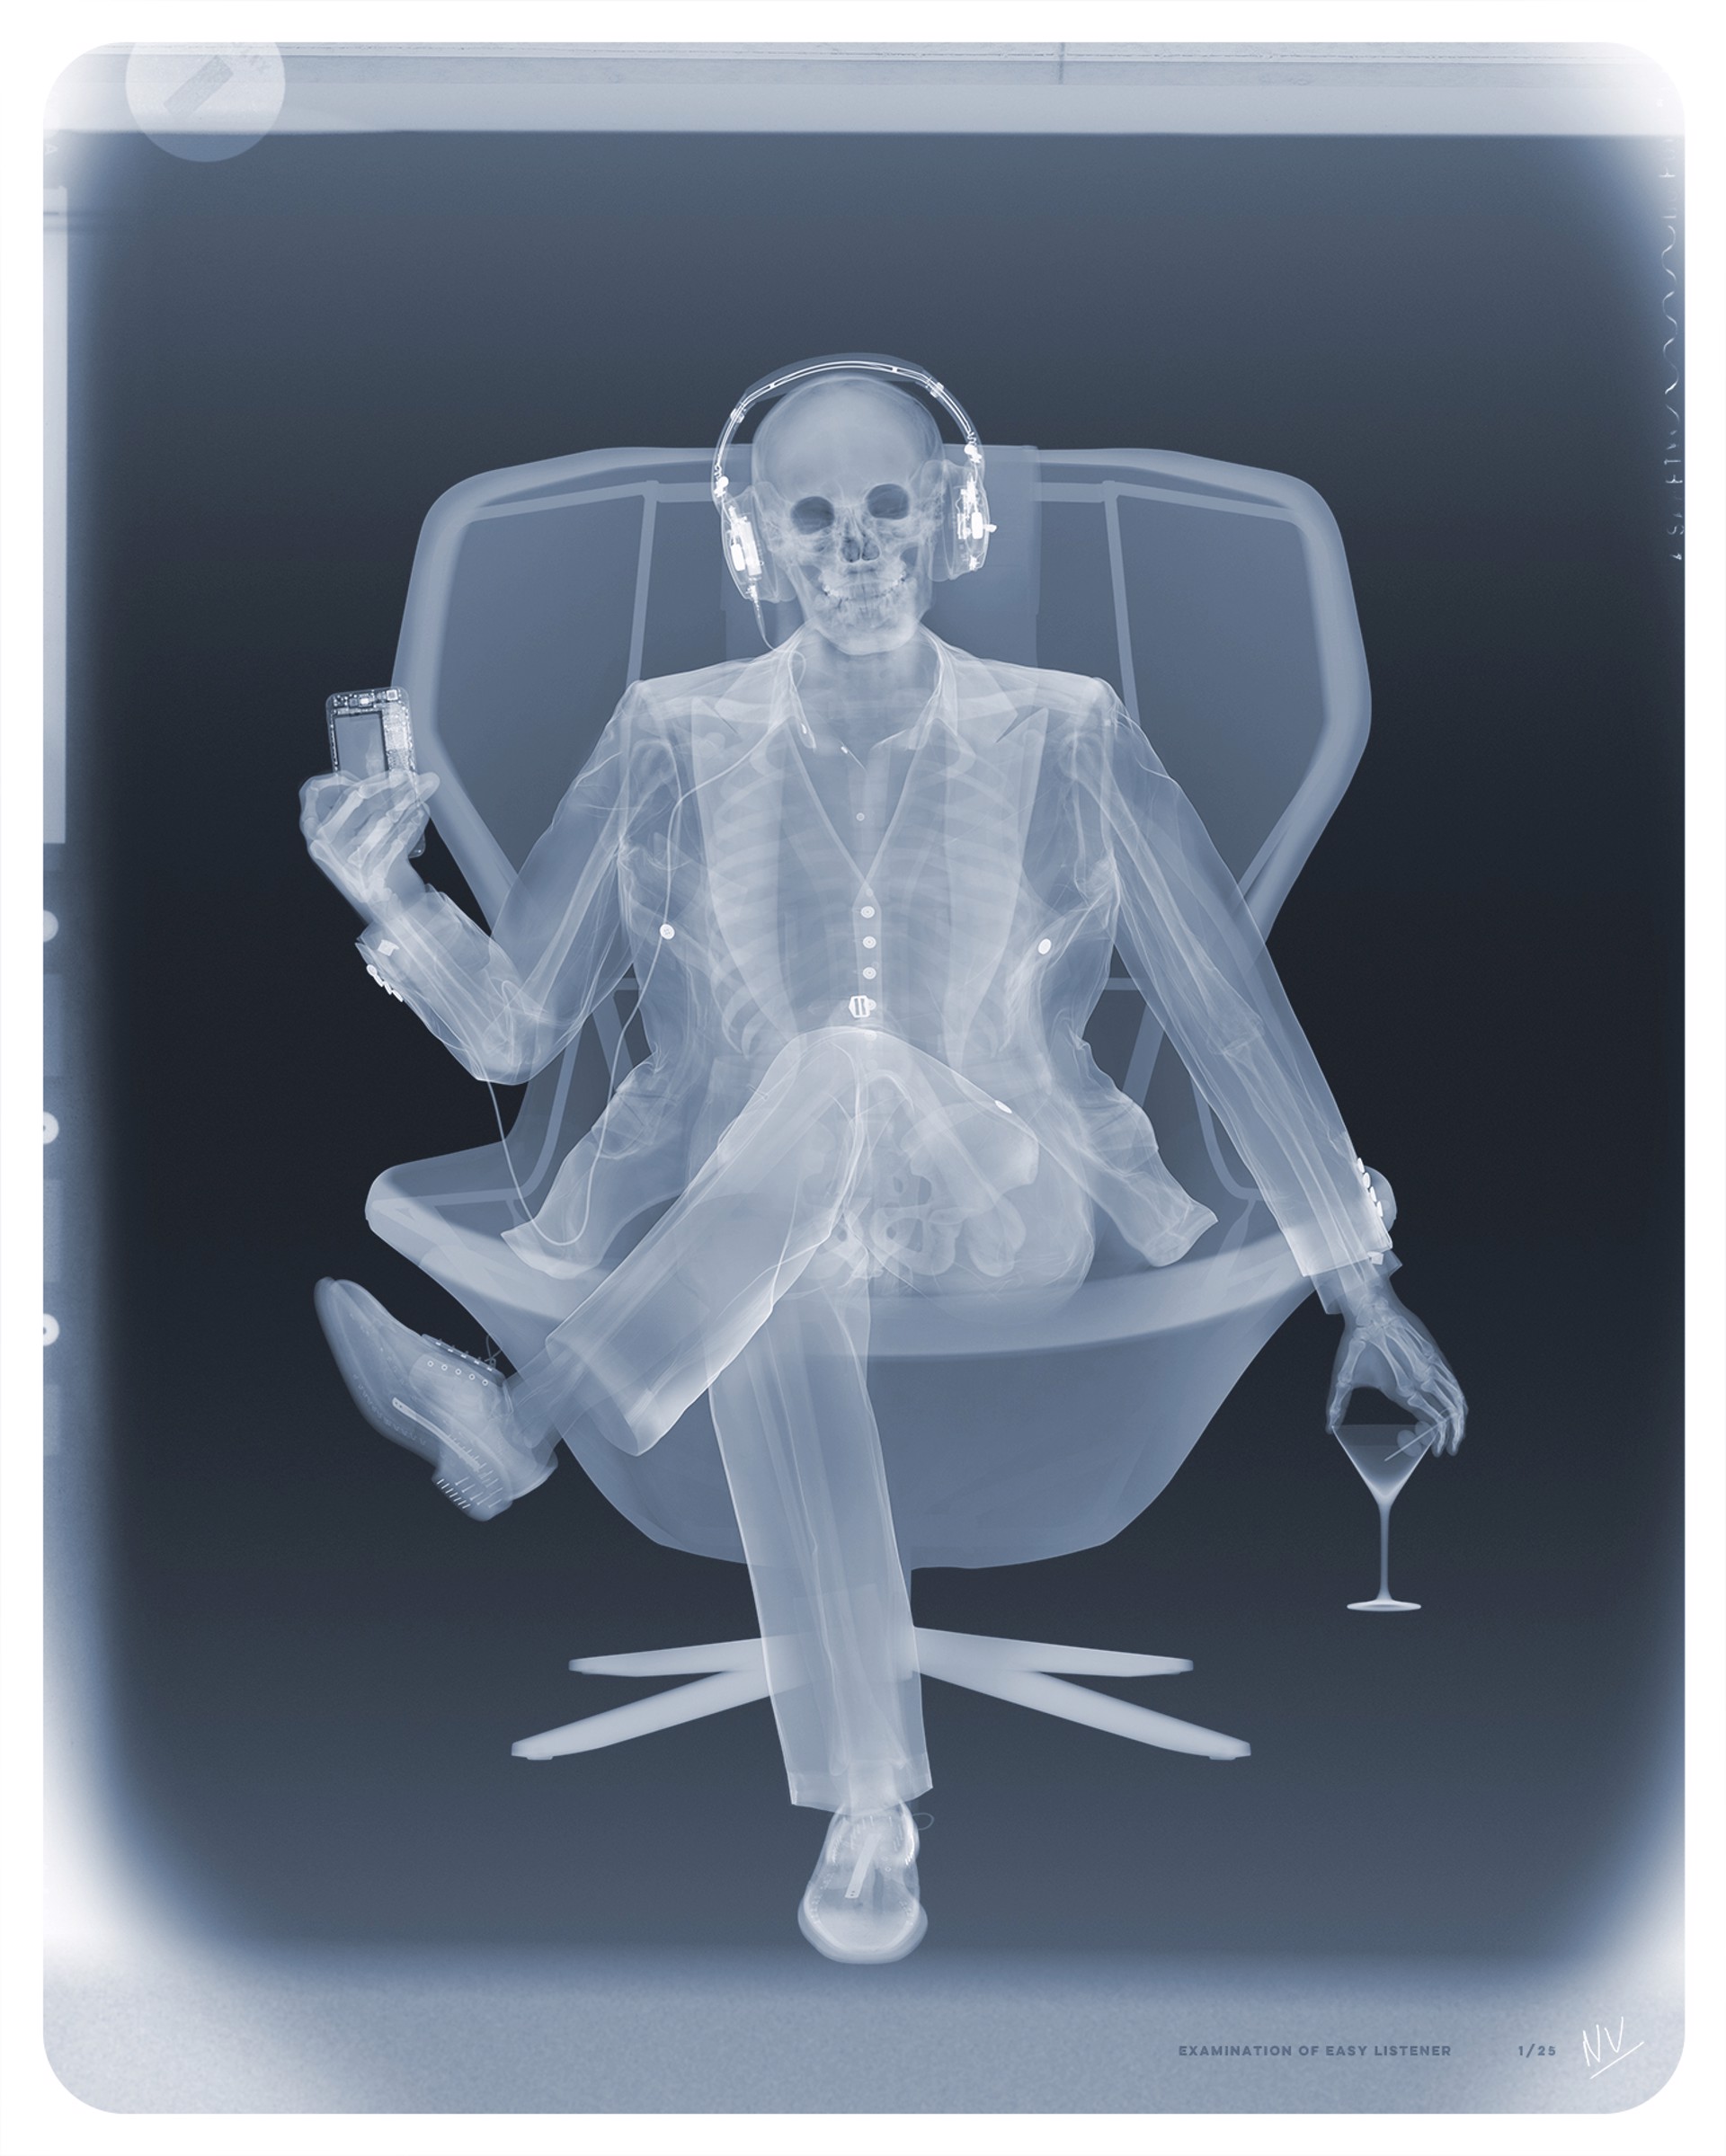 Examination of Easy Listener by Nick Veasey